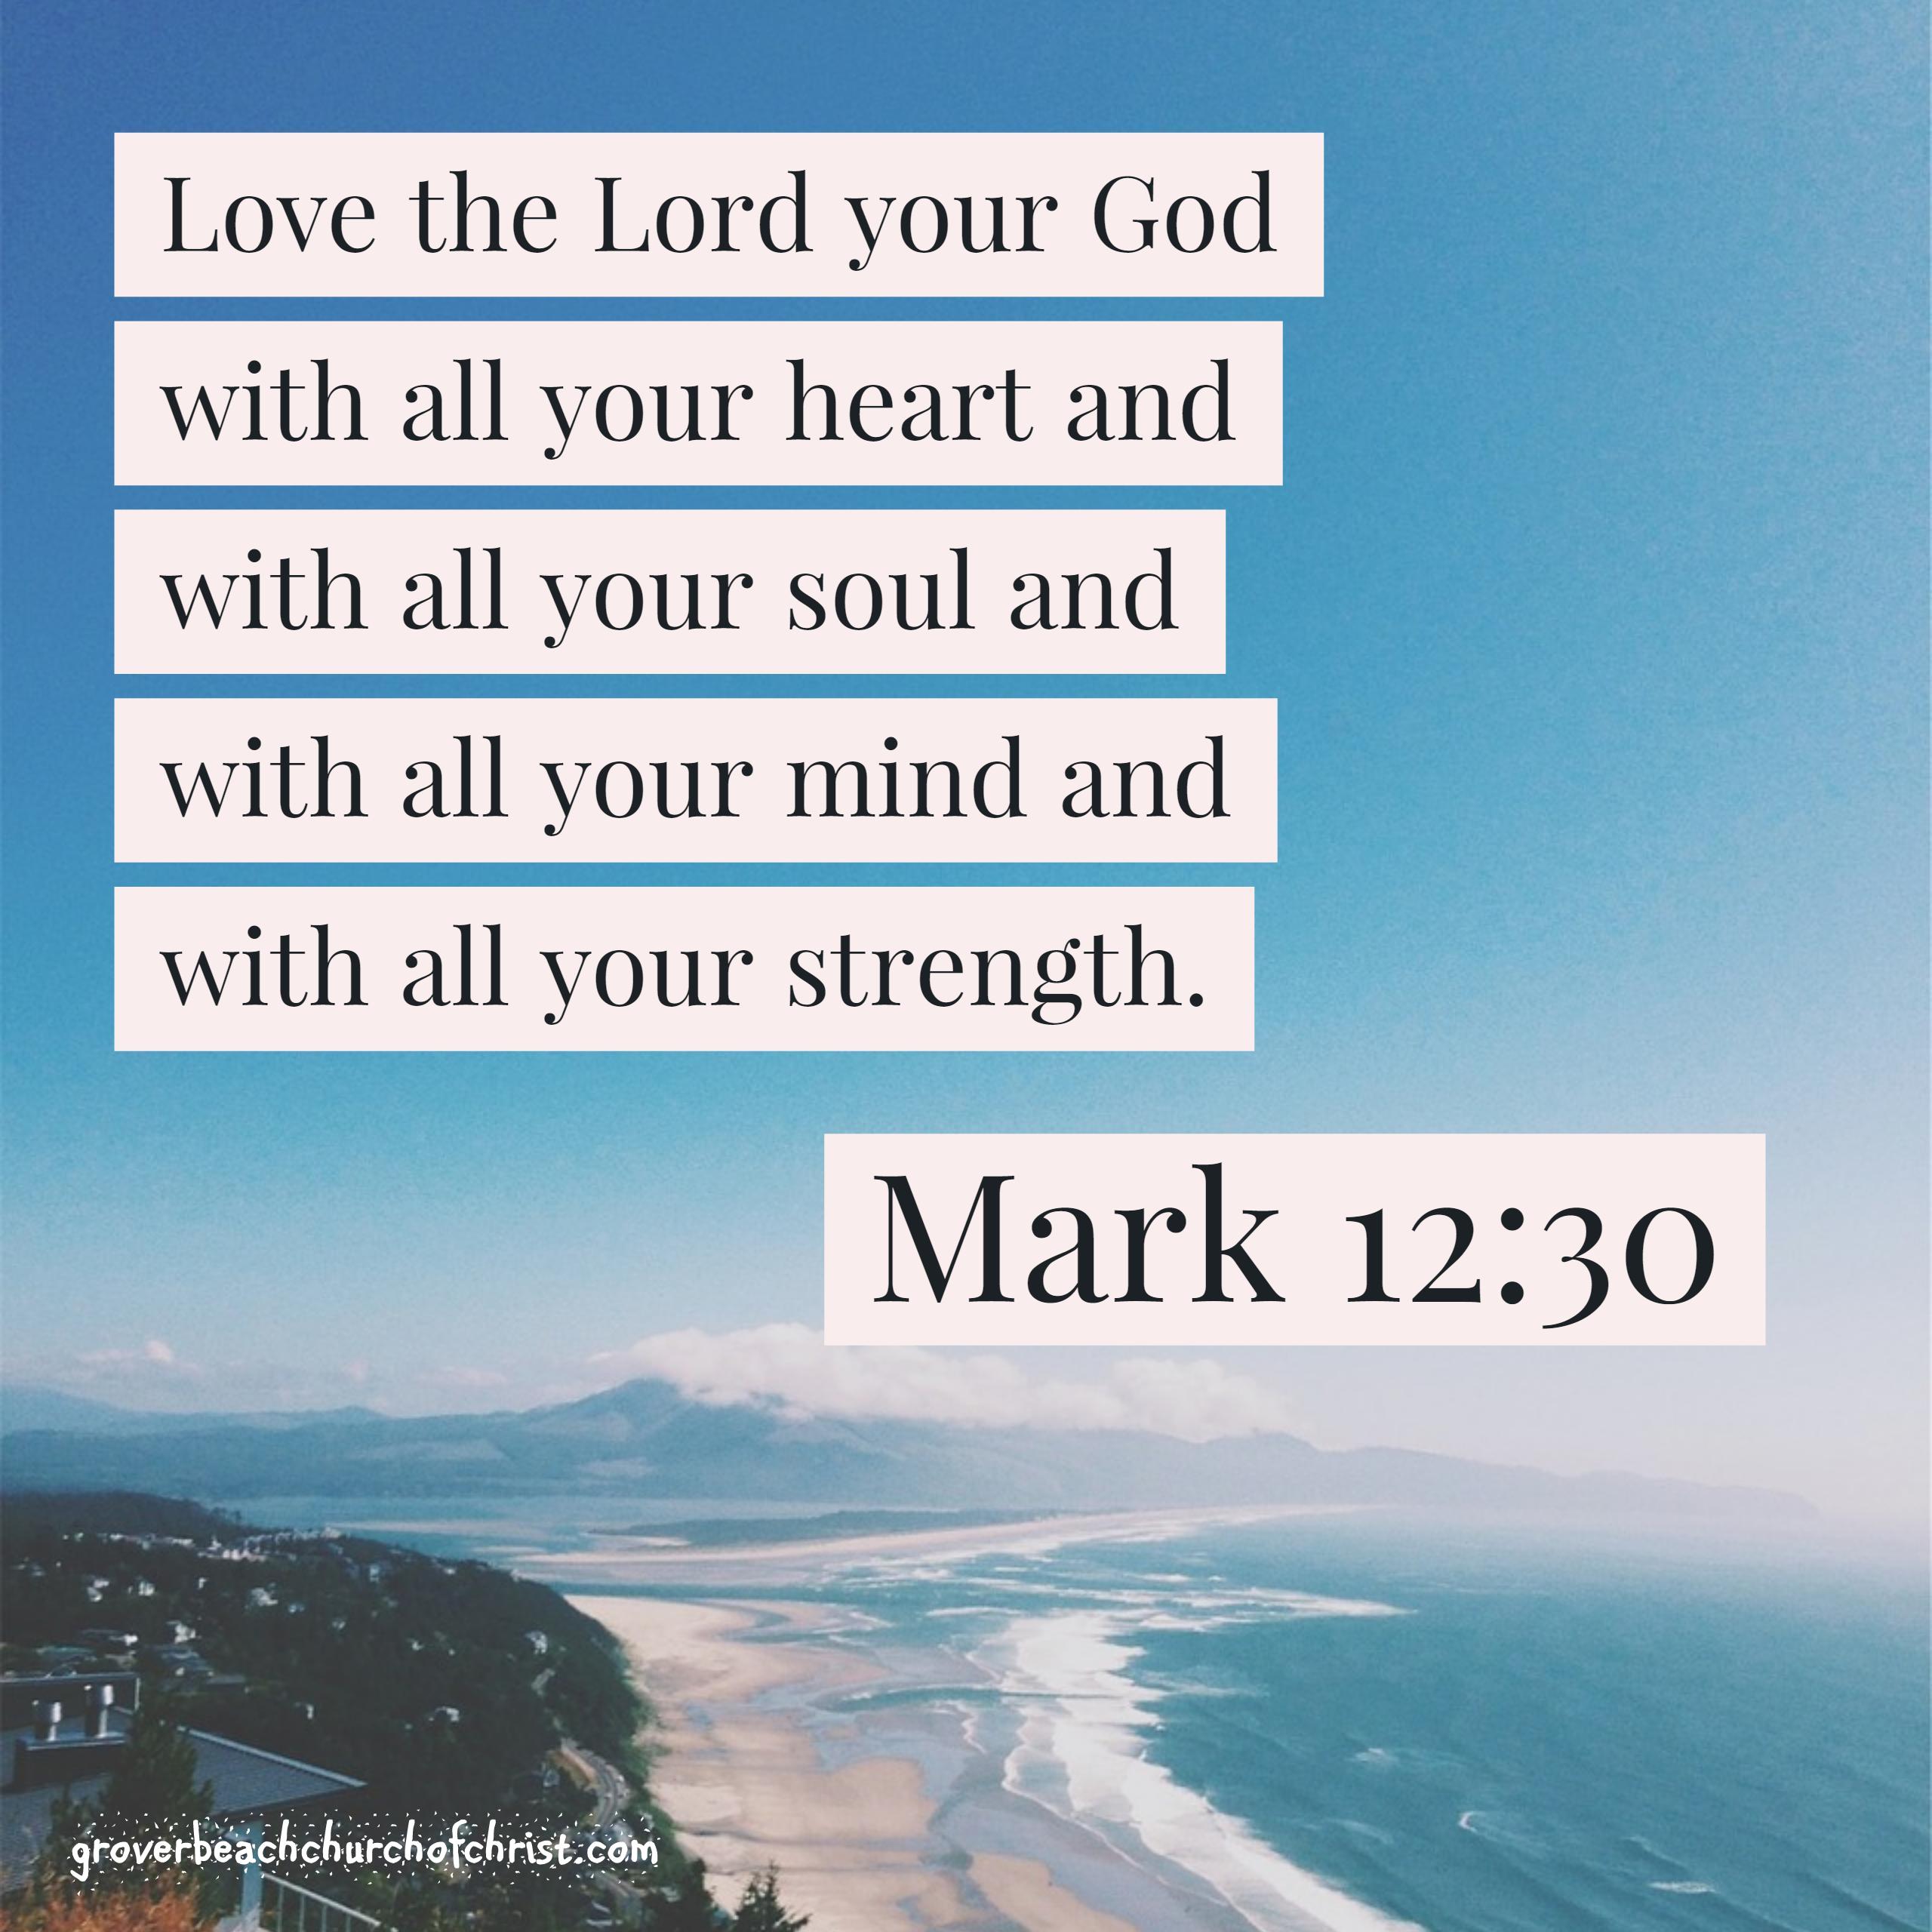 Mark 12:30 Love the Lord with all your heart